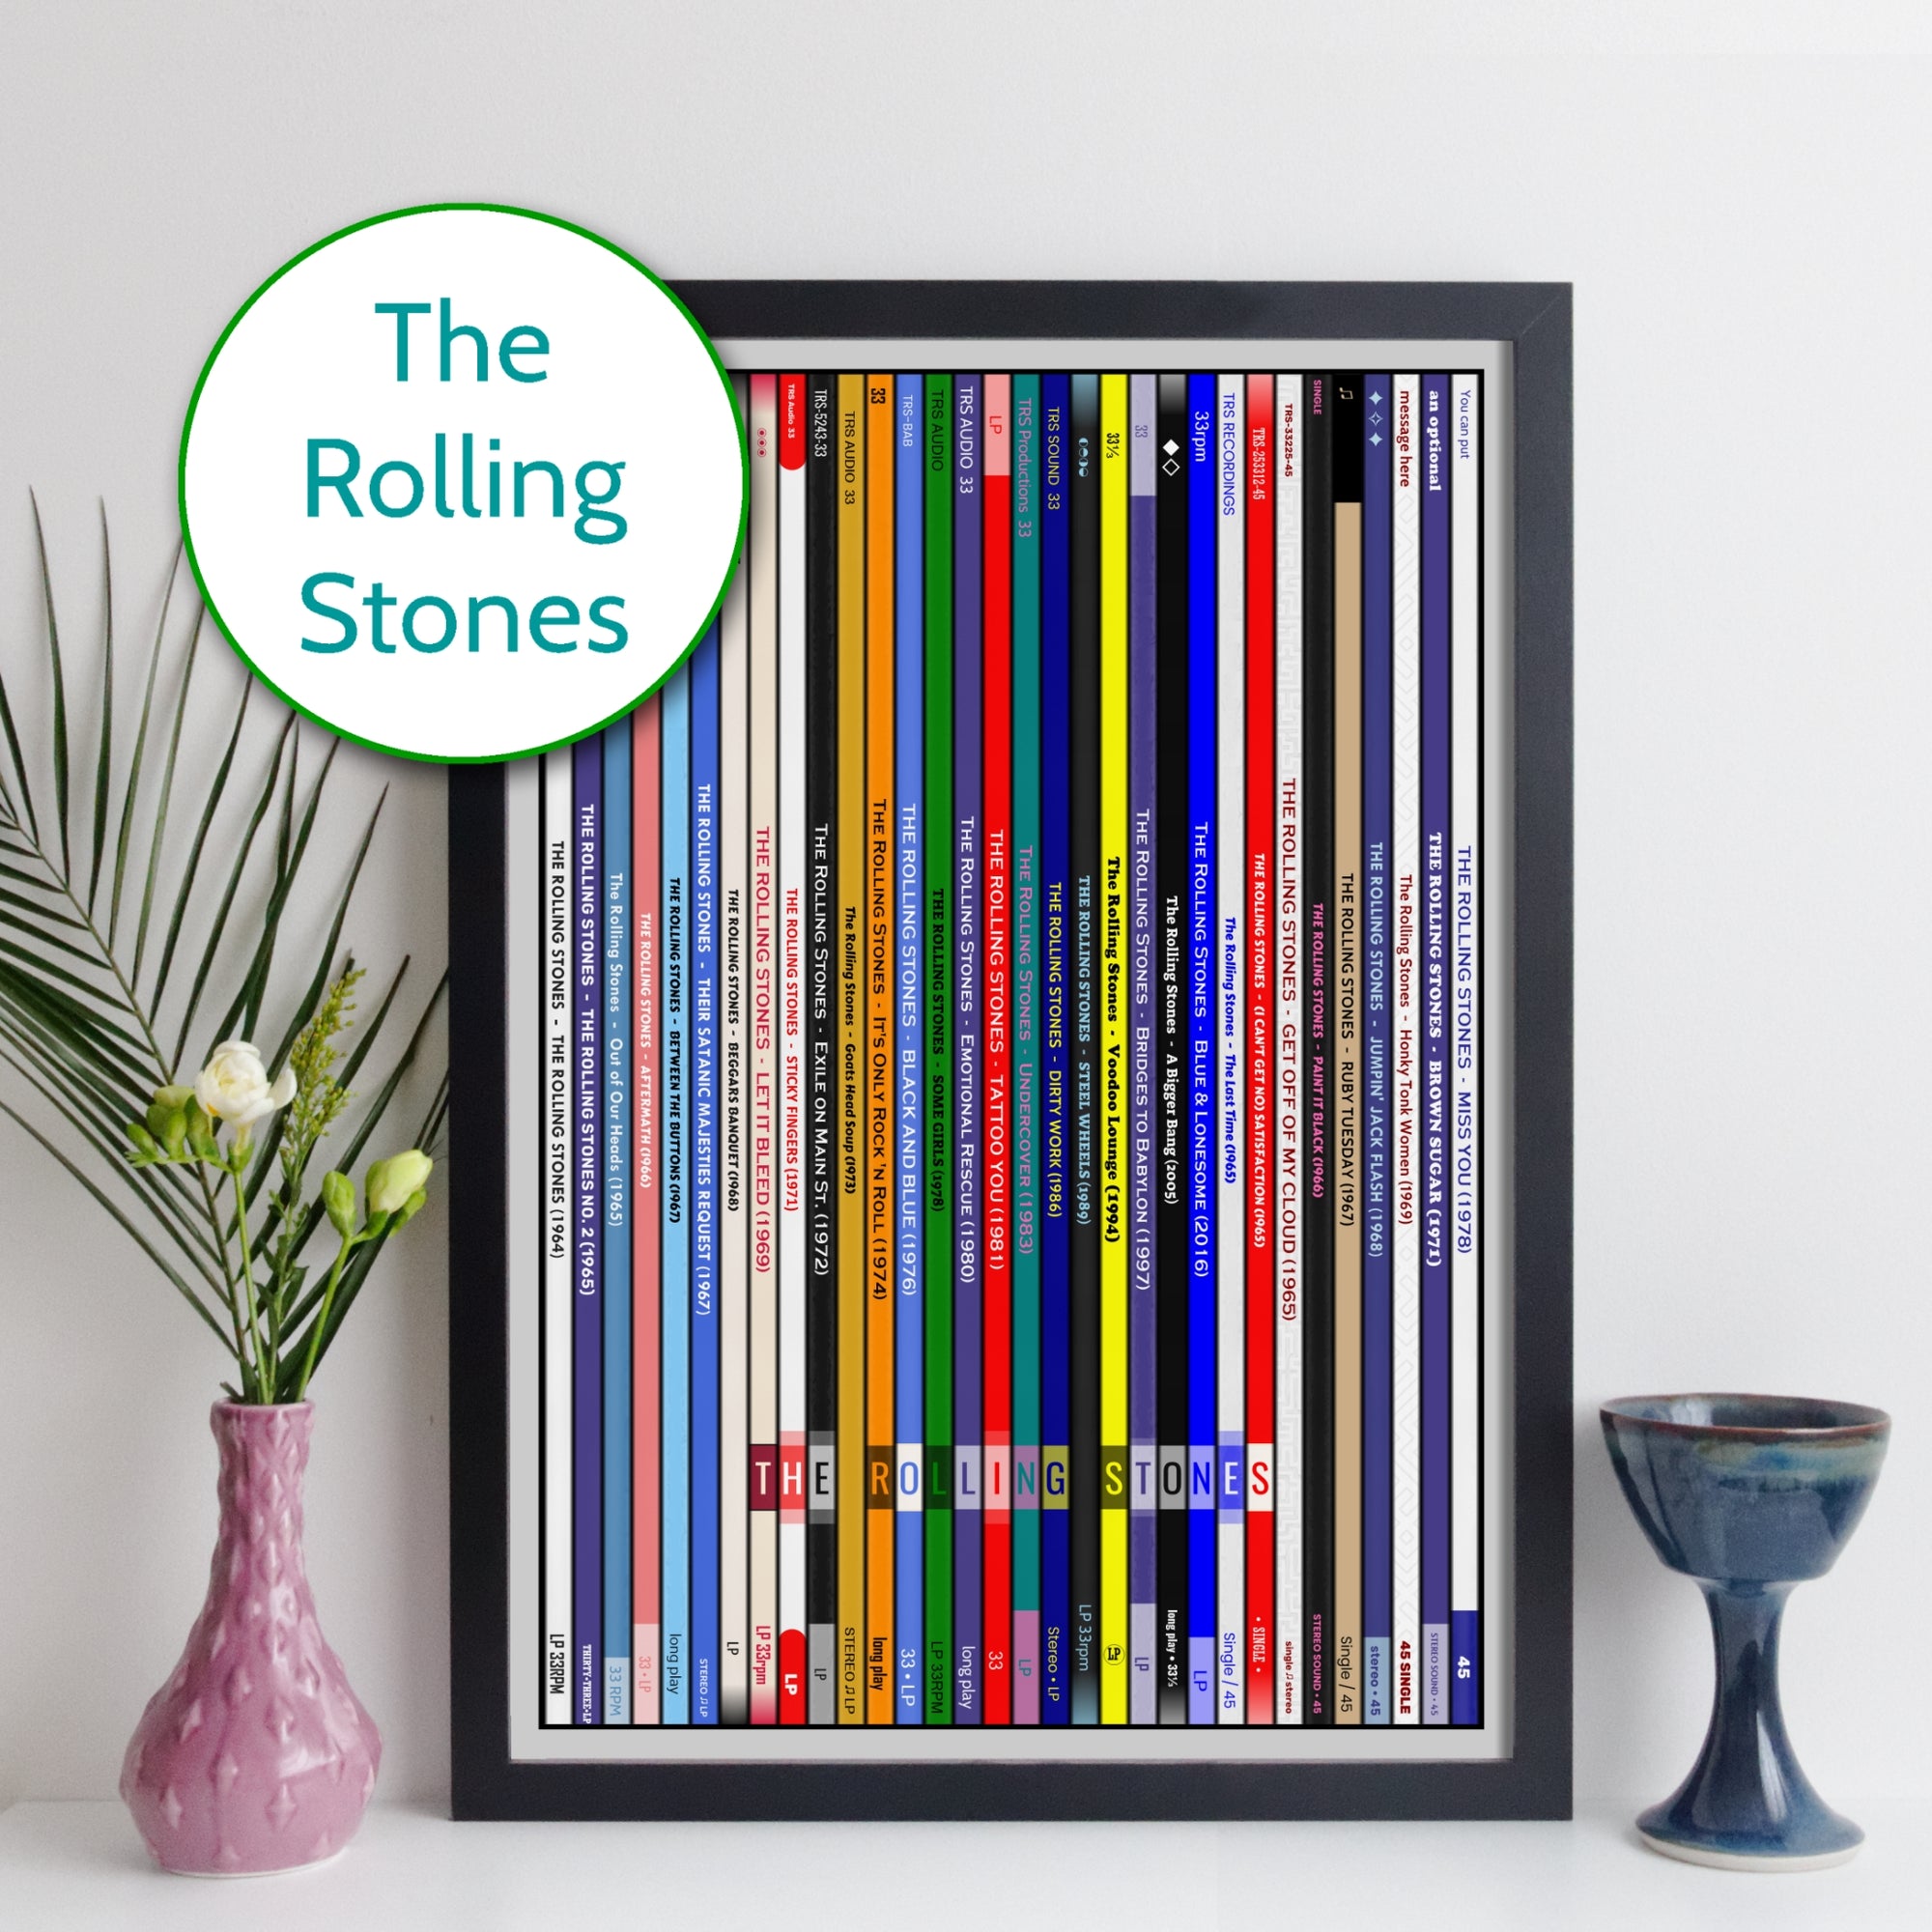 The Rolling Stones Discography Print